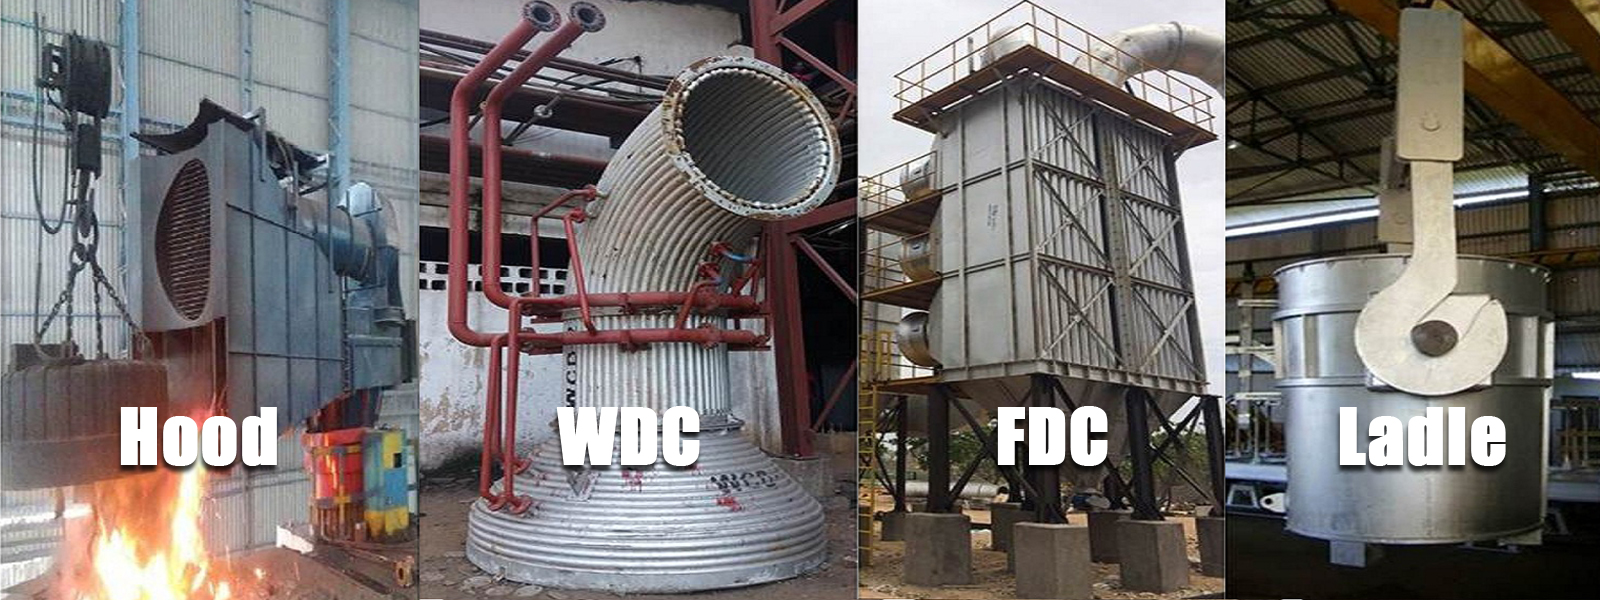 cyclone dust collector manufacturers, cyclone dust collector manufacturer in india, baghouse manufacturers, baghouse manufacturers india, multiclone dust collector, multiclone dust collector manufacturers, multiclone dust collector manufacturers in india, reverse air baghouse manufacturers, scrubber manufacturers in india, venturi scrubber manufacturers, industrial fan manufacturers, industrial fan manufacturers in india, axial fan manufacturers, axial fans manufacturers in india, id fan manufacturers, id fan manufacturers in india,centrifugal fan manufacturers, centrifugal fan manufacturers in india, industrial blower manufacturers, industrial blower manufacturers in india, tube axial fan manufacturers, tube axial fans manufacturers india, dust collection system manufacturers, dust collector system manufacturer india, dust collector system, fume extraction system, fume extraction system manufacturers ,pyrolysis plant manufacturers in india, pyrolysis plant, rotary dryer manufacturers, incinerator manufacturer in india, industrial waste incinerator manufacturers, force draft cooler,recuperator manufacturer in india, ladle manufacturers in india, aluminium extrusion plant manufacturers in india, turnkey projects companies in india, hot air generator manufacturers in india, plate bending machine manufacturers in india, Rotary kiln manufacturers, furnace manufacturers in india, calciner manufacturers, bag filter manufacturers in india, bag filter manufacturers, cartridge filter manufacturers in india, cyclone dust collector,Battery Cutting Machine, battery cutting machine manufacturers, battery cutting machine manufacturers in india,Battery Recycling Plant, battery recycling plant in india, battery recycling plant manufacturers,Battery Recycling Technology ,battery recycling technology india, lead acid battery recycling companies in india,Disposal technology for Lead Acid Battery Waste,disposal technology for lead acid battery waste india.